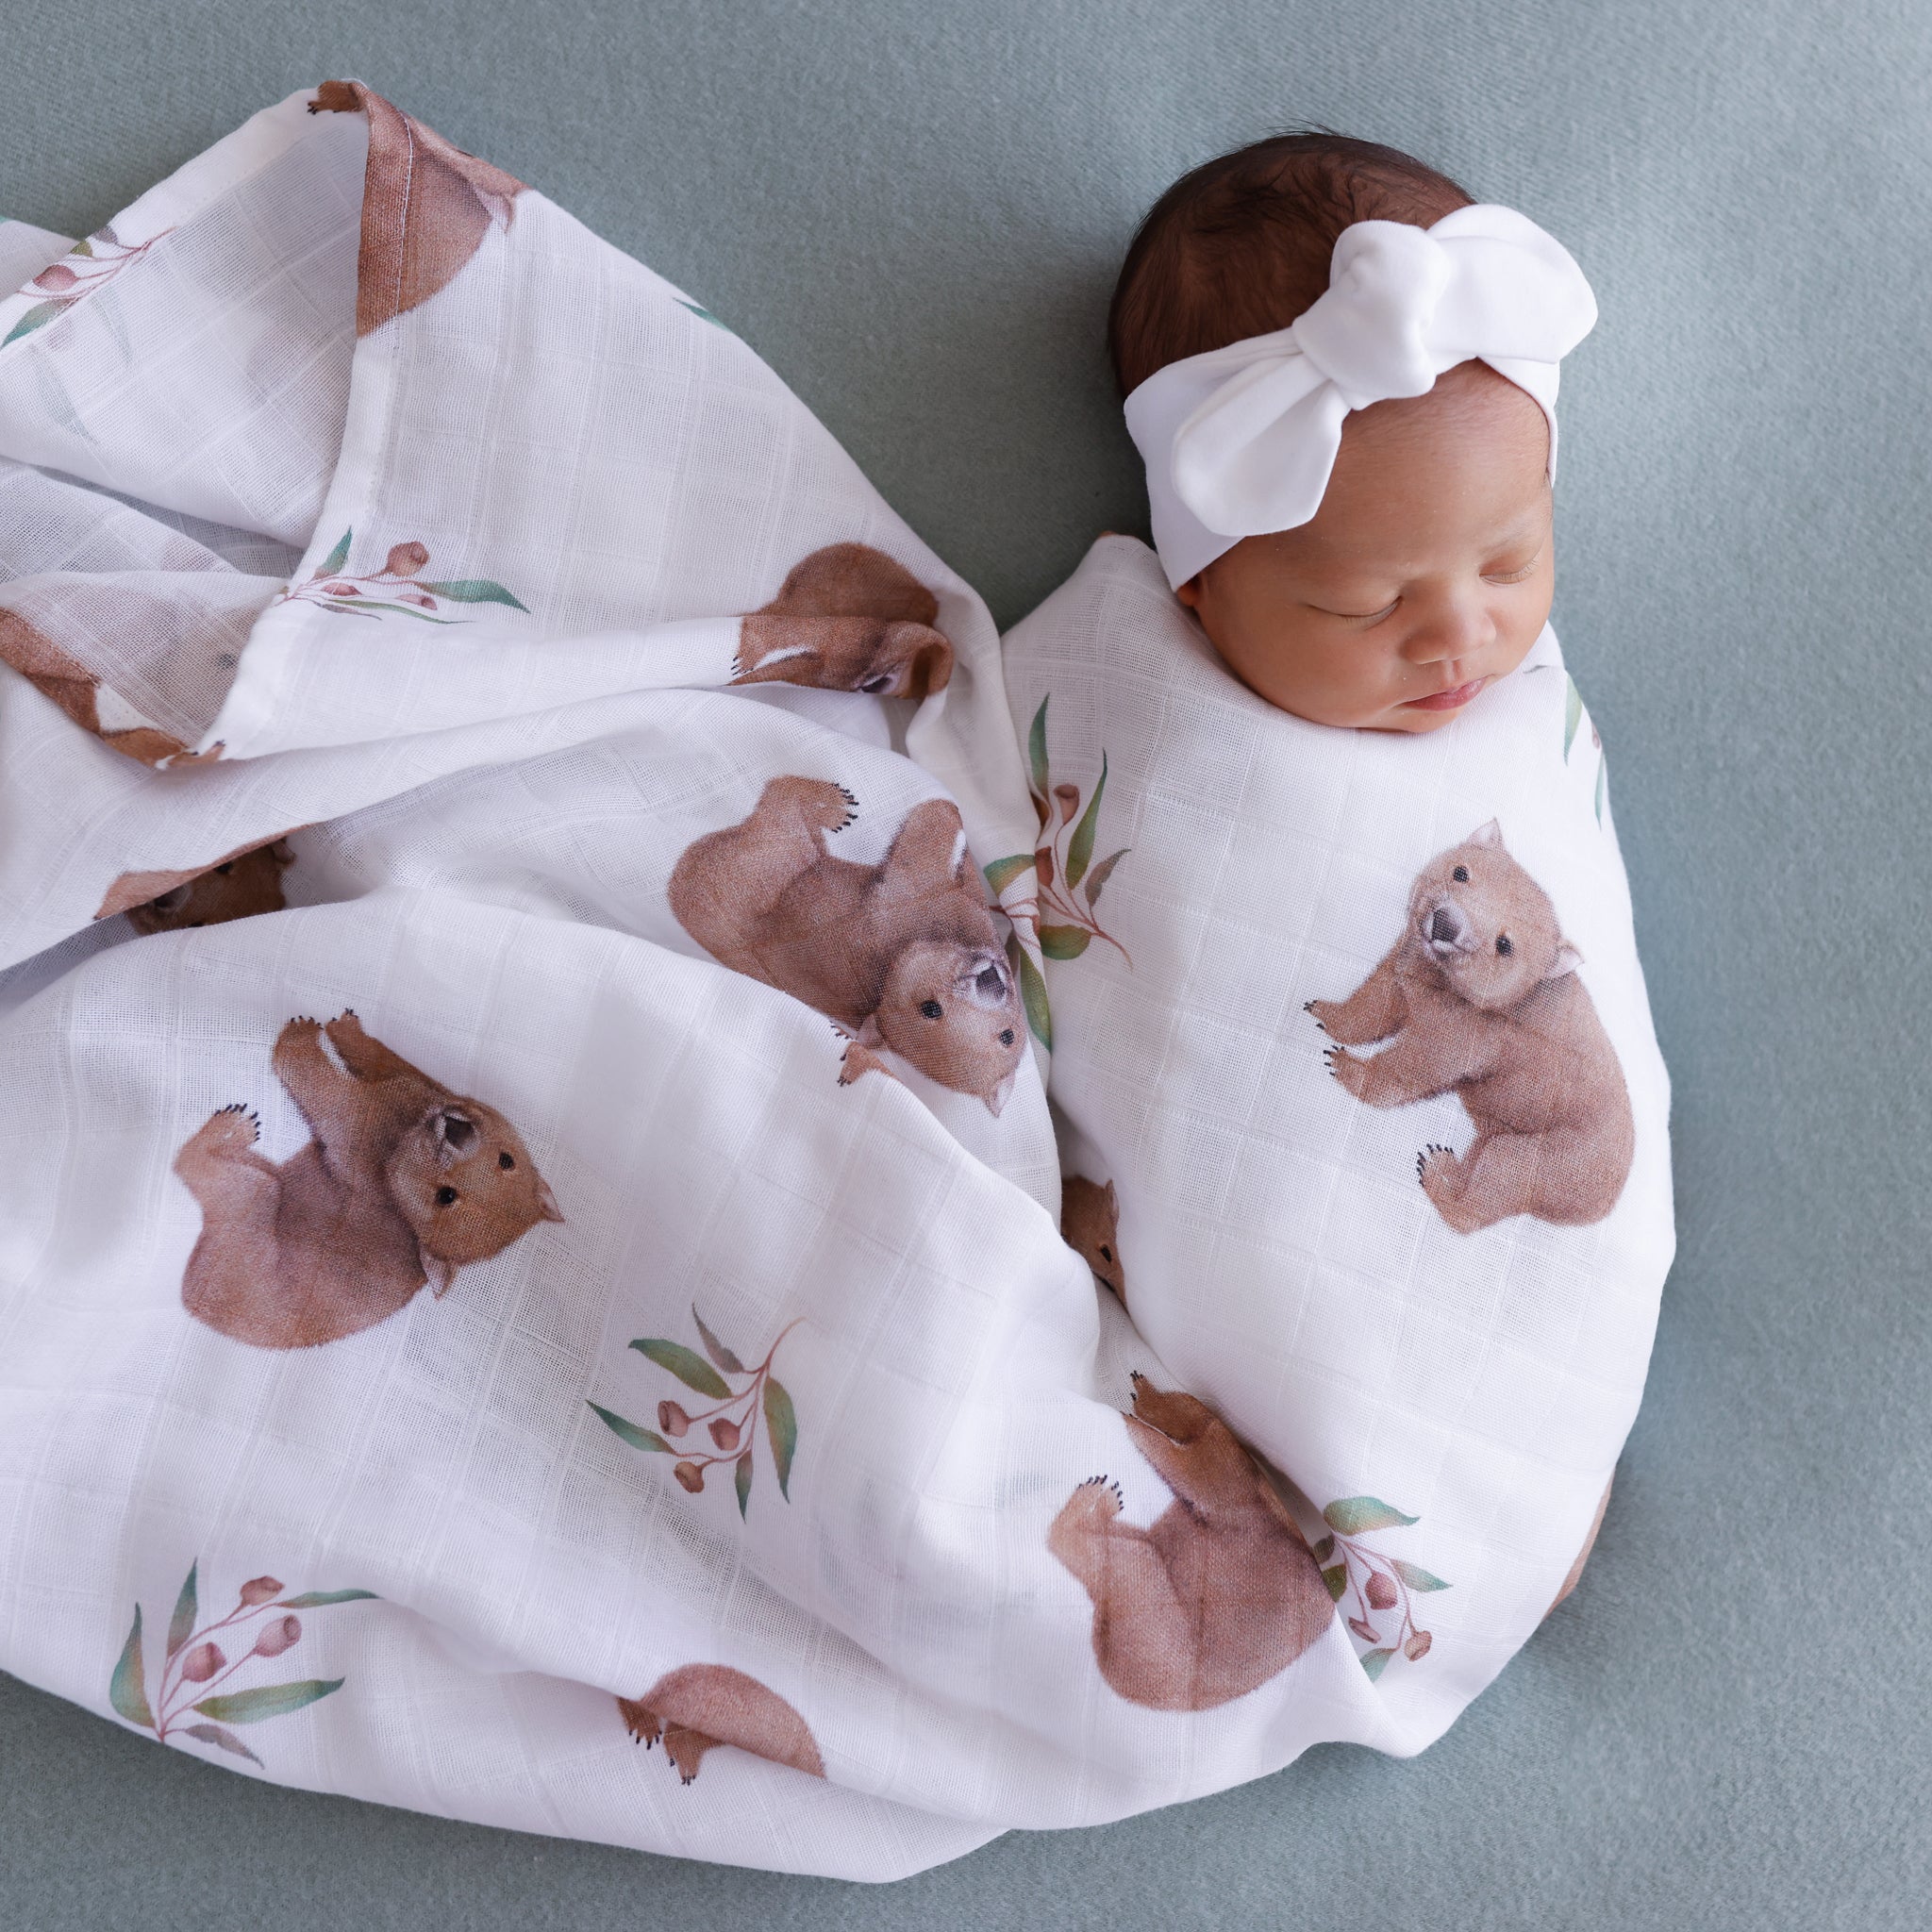 wombat print on a gots certified organic muslin swaddle wrapped on a baby .Baby is also wearing a white Thea with Love topknot on her head